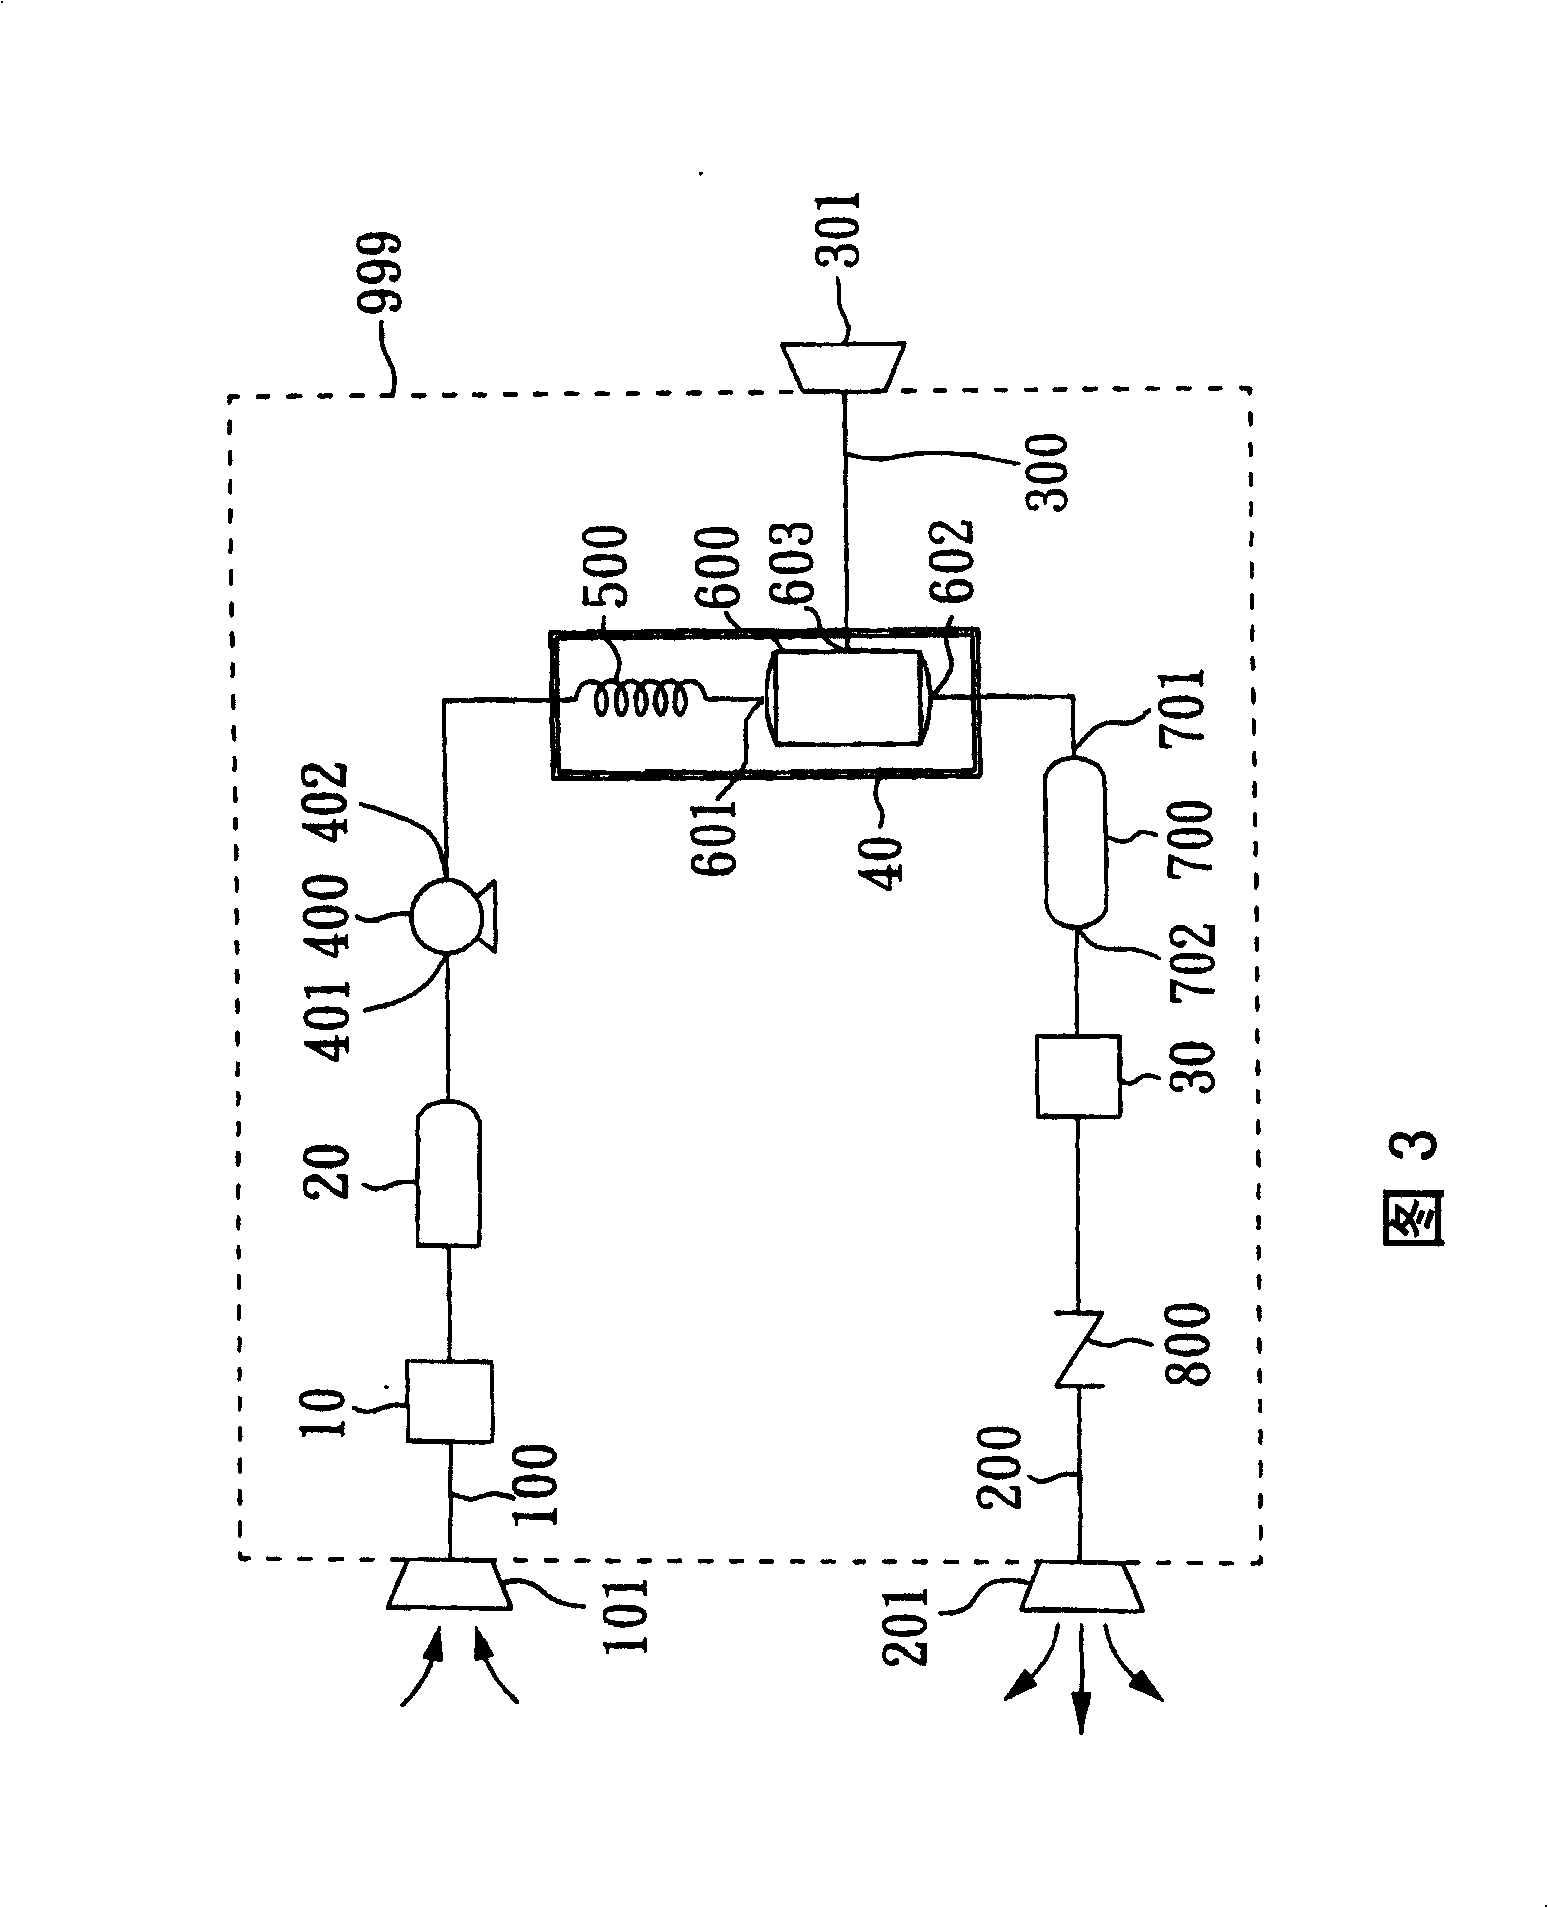 Device for improving air quality device